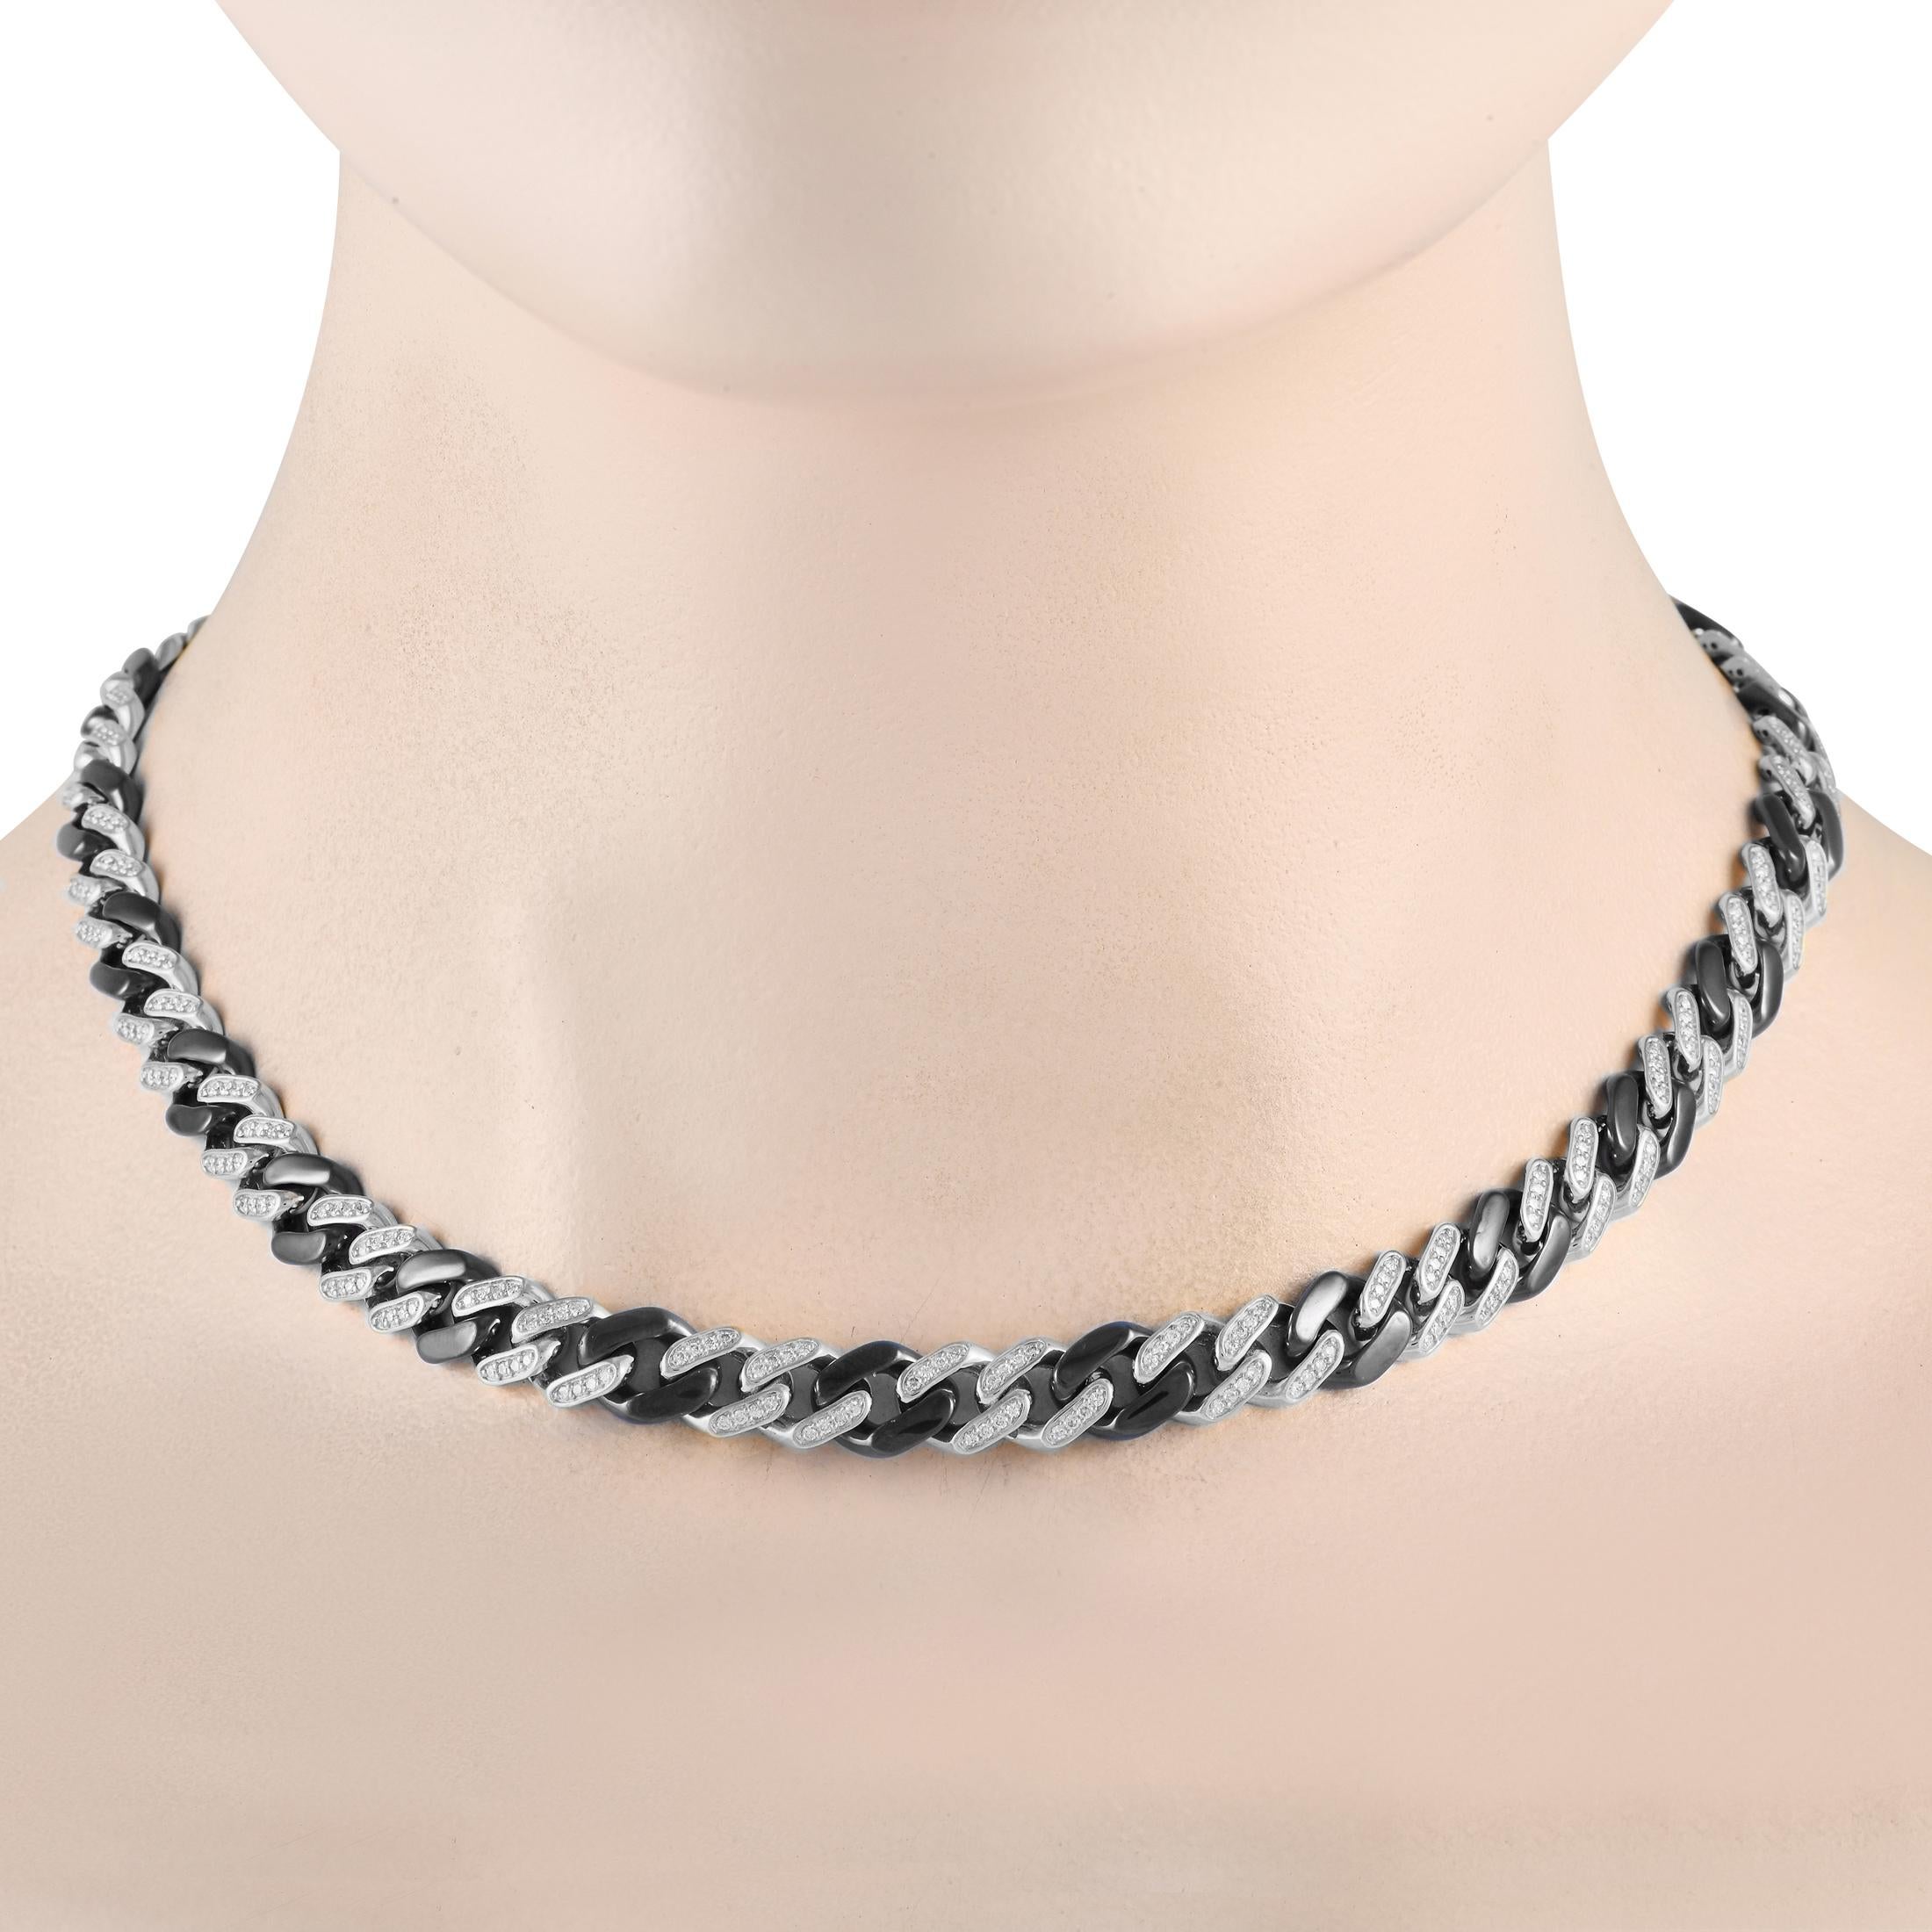 Looking for a bold finishing touch to polish a dressed-up look? This curb chain diamond necklace is the key. It features a 17.5-long chain of curb links, alternating between diamond-set white gold link duos and a blackened link.  This LB Exclusive